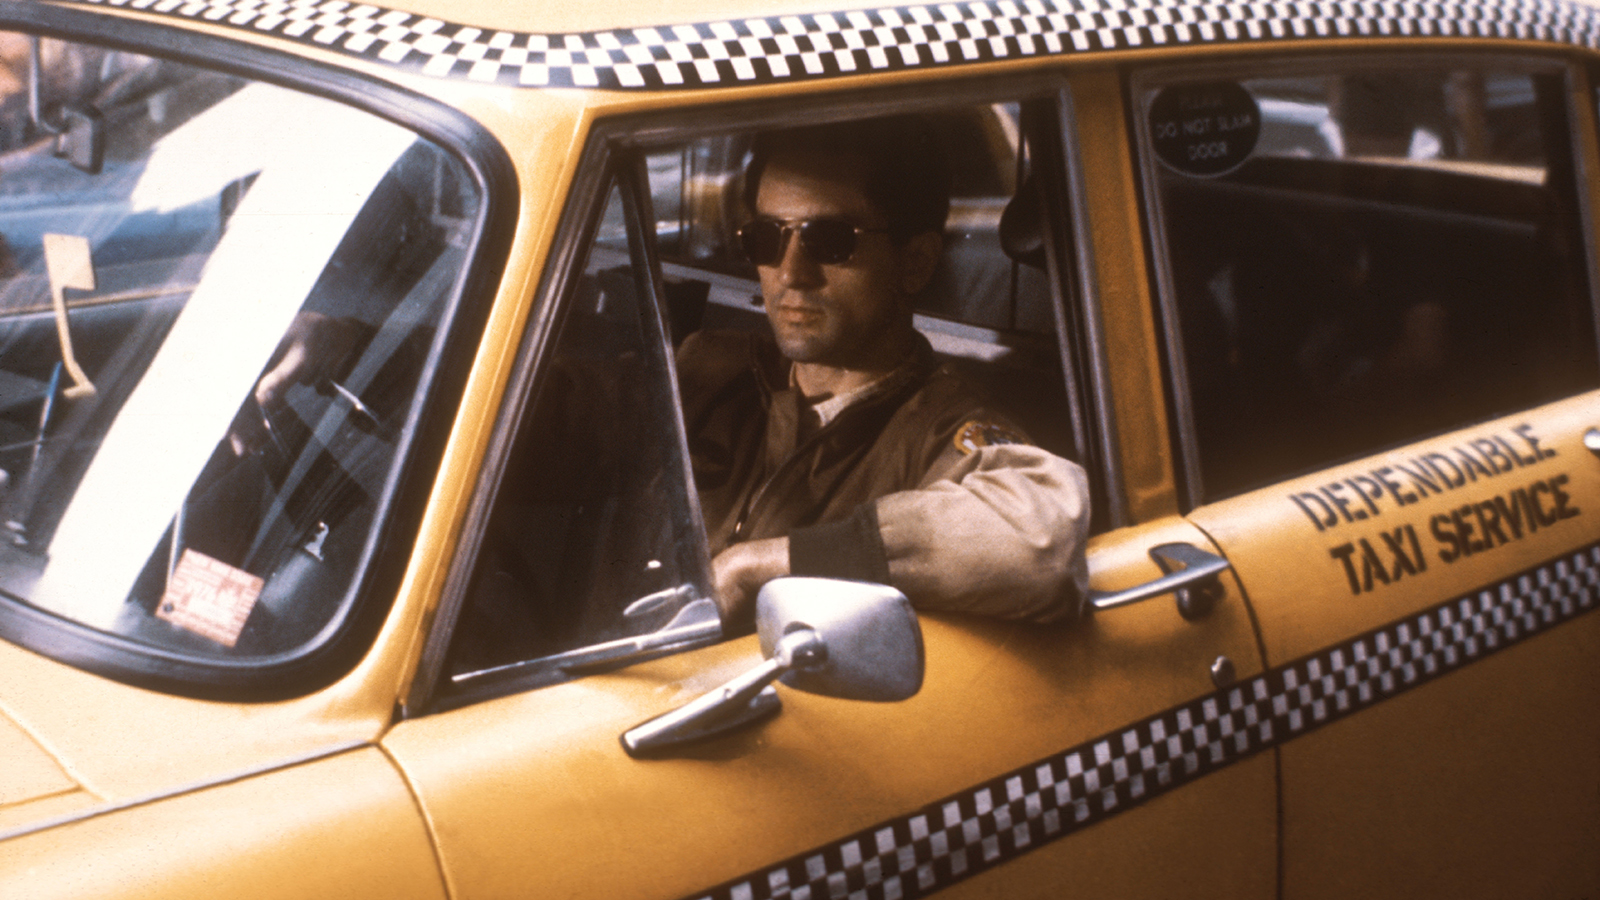 The screenwriter on his breakout film, Taxi Driver.